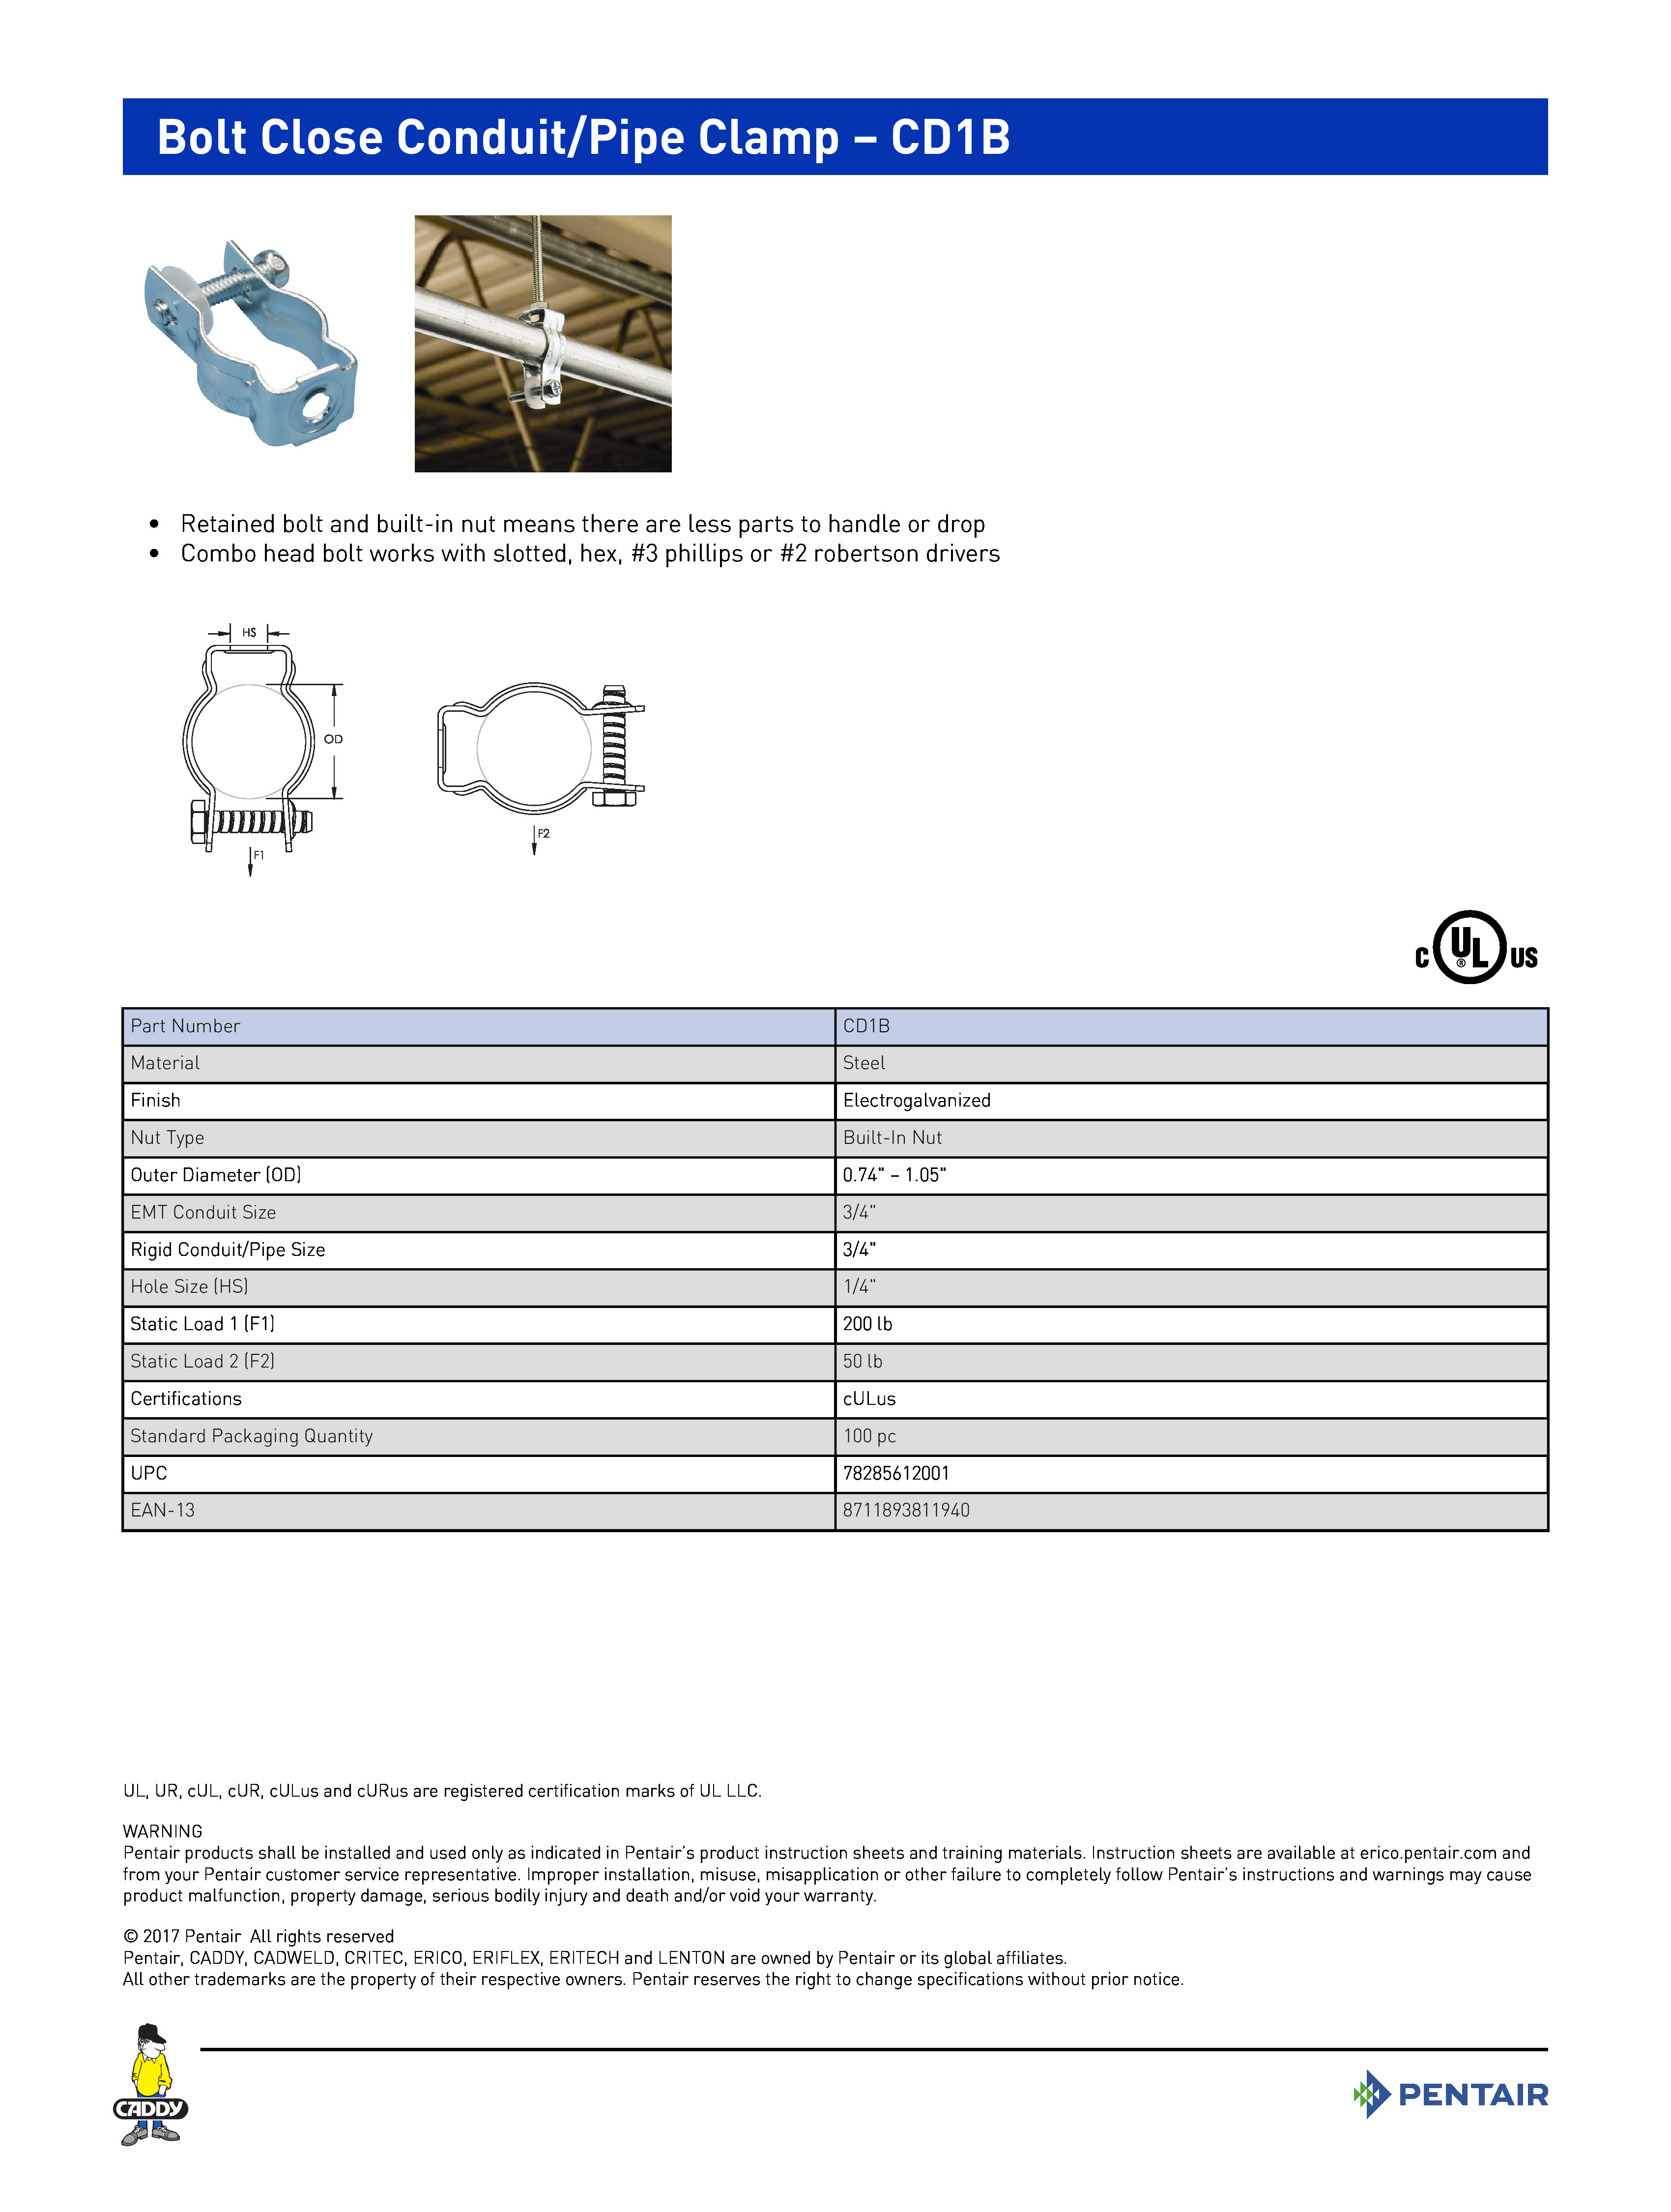 Bolt Close Conduit/Pipe Clamp – CD1B	
 	
•	Retained bolt and built-in nut means there are less parts to handle or drop	
•	Combo head bolt works with slotted, hex, #3 phillips or #2 robertson drivers	
 	
Part NumberCD1BMaterialSteelFinishElectrogalvanizedNut TypeBuilt-In NutOuter Diameter (OD)0.74" – 1.05"EMT Conduit Size3/4"Rigid Conduit/Pipe Size3/4"Hole Size (HS)1/4"Static Load 1 (F1)200 lbStatic Load 2 (F2)50 lbCertificationscULusStandard Packaging Quantity100 pcUPC78285612001EAN-138711893811940
UL, UR, cUL, cUR, cULus and cURus are registered certification marks of UL LLC. WARNINGPentair products shall be installed and used only as indicated in Pentair’s product instruction sheets and training materials. Instruction sheets are available at erico.pentair.com andfrom your Pentair customer service representative. Improper installation, misuse, misapplication or other failure to completely follow Pentair’s instructions and warnings may causeproduct malfunction, property damage, serious bodily injury and death and/or void your warranty. 